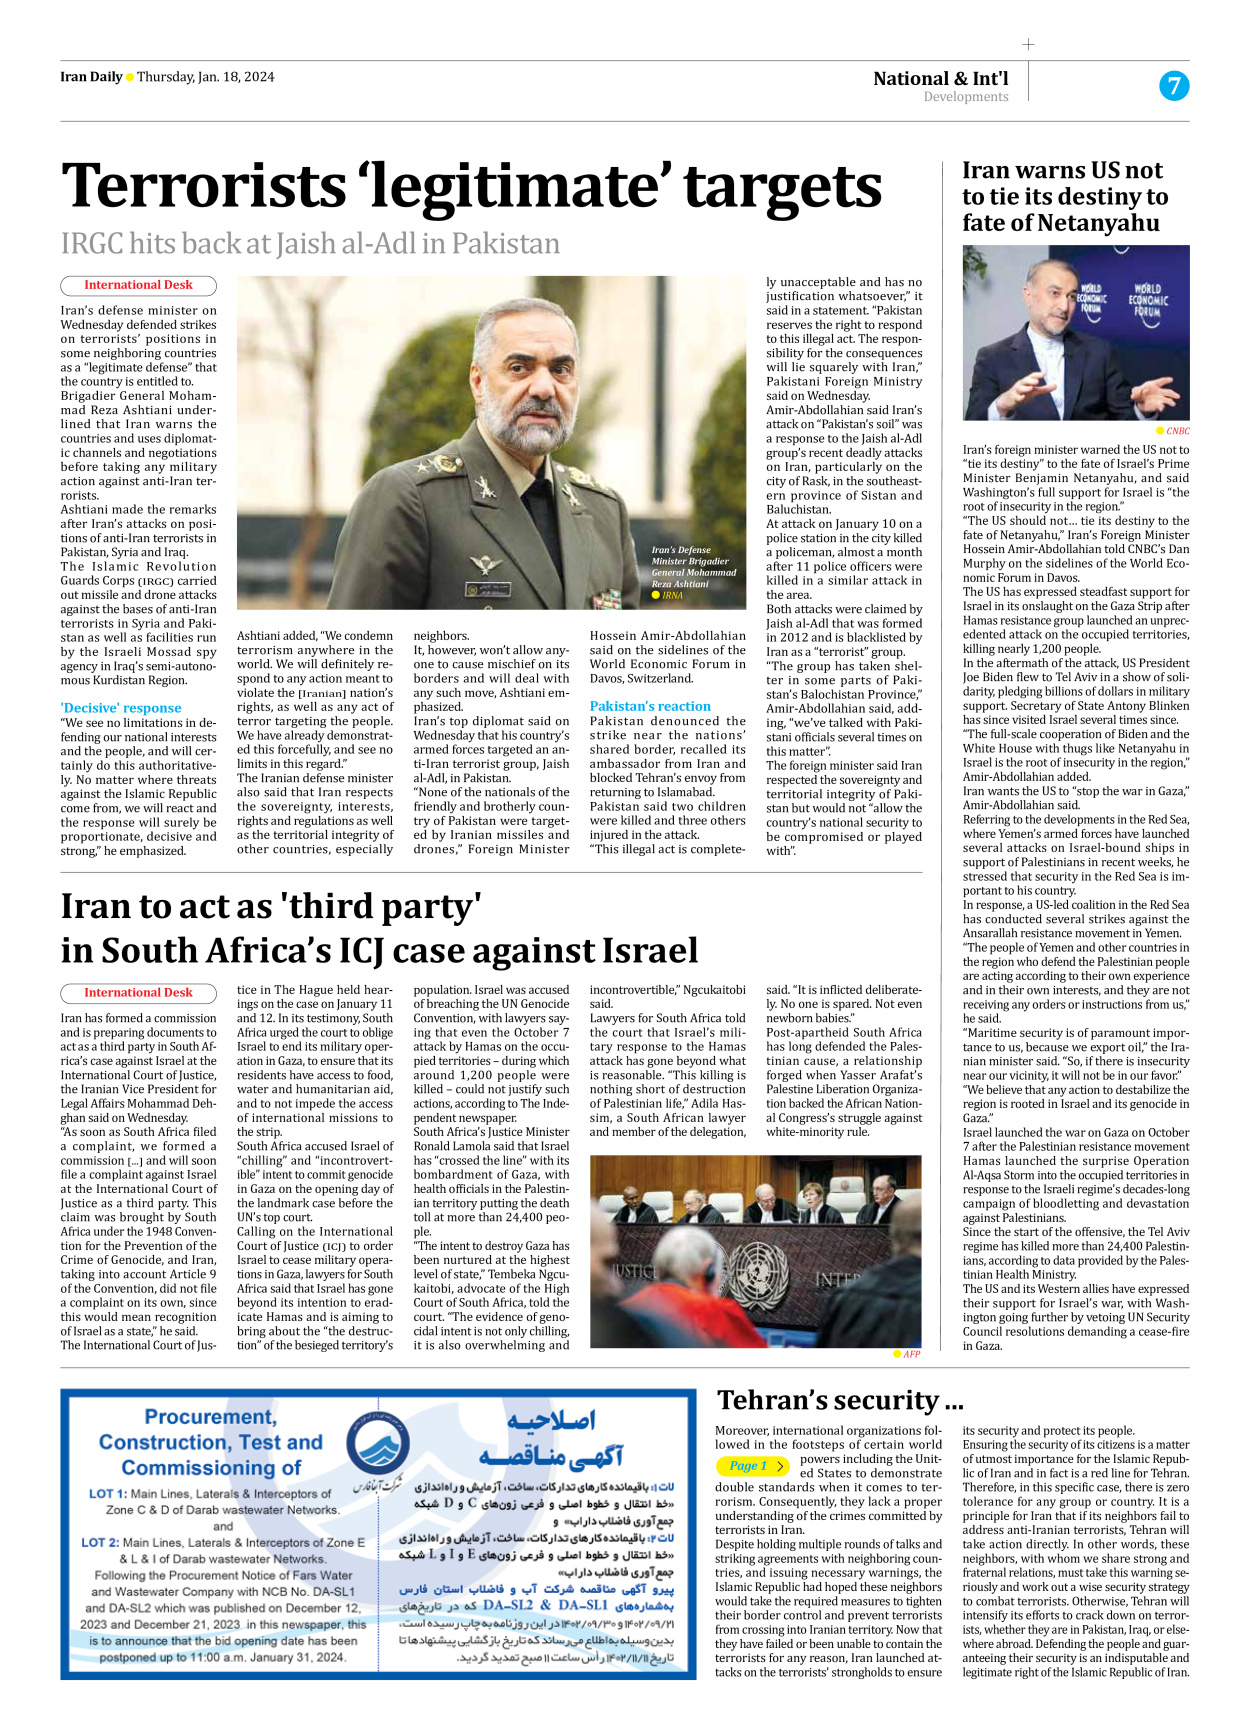 Iran Daily - Number Seven Thousand Four Hundred and Eighty Eight - 18 January 2024 - Page 7